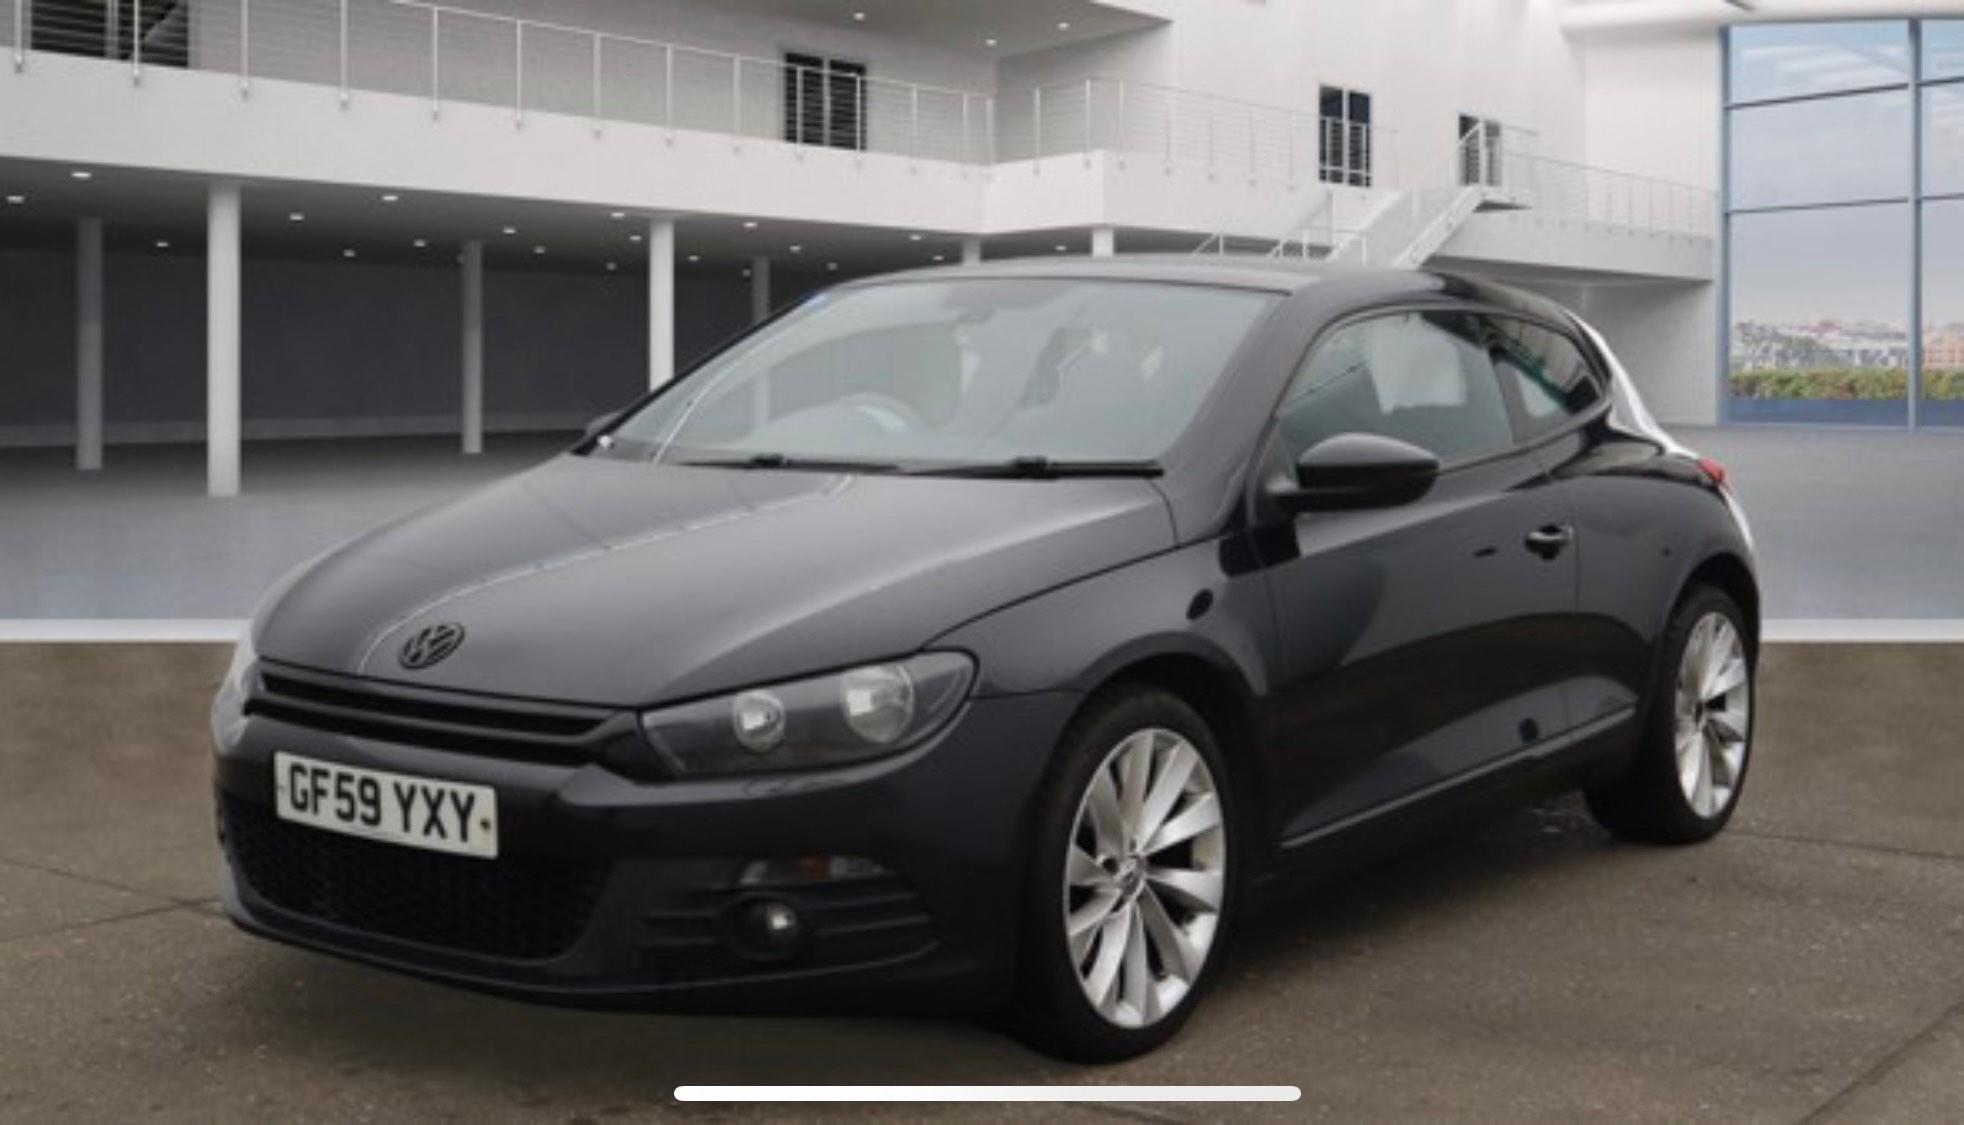 Buying a Used Volkswagen Scirocco - What to Review & Look For? - JJ Premium  Cars Ltd